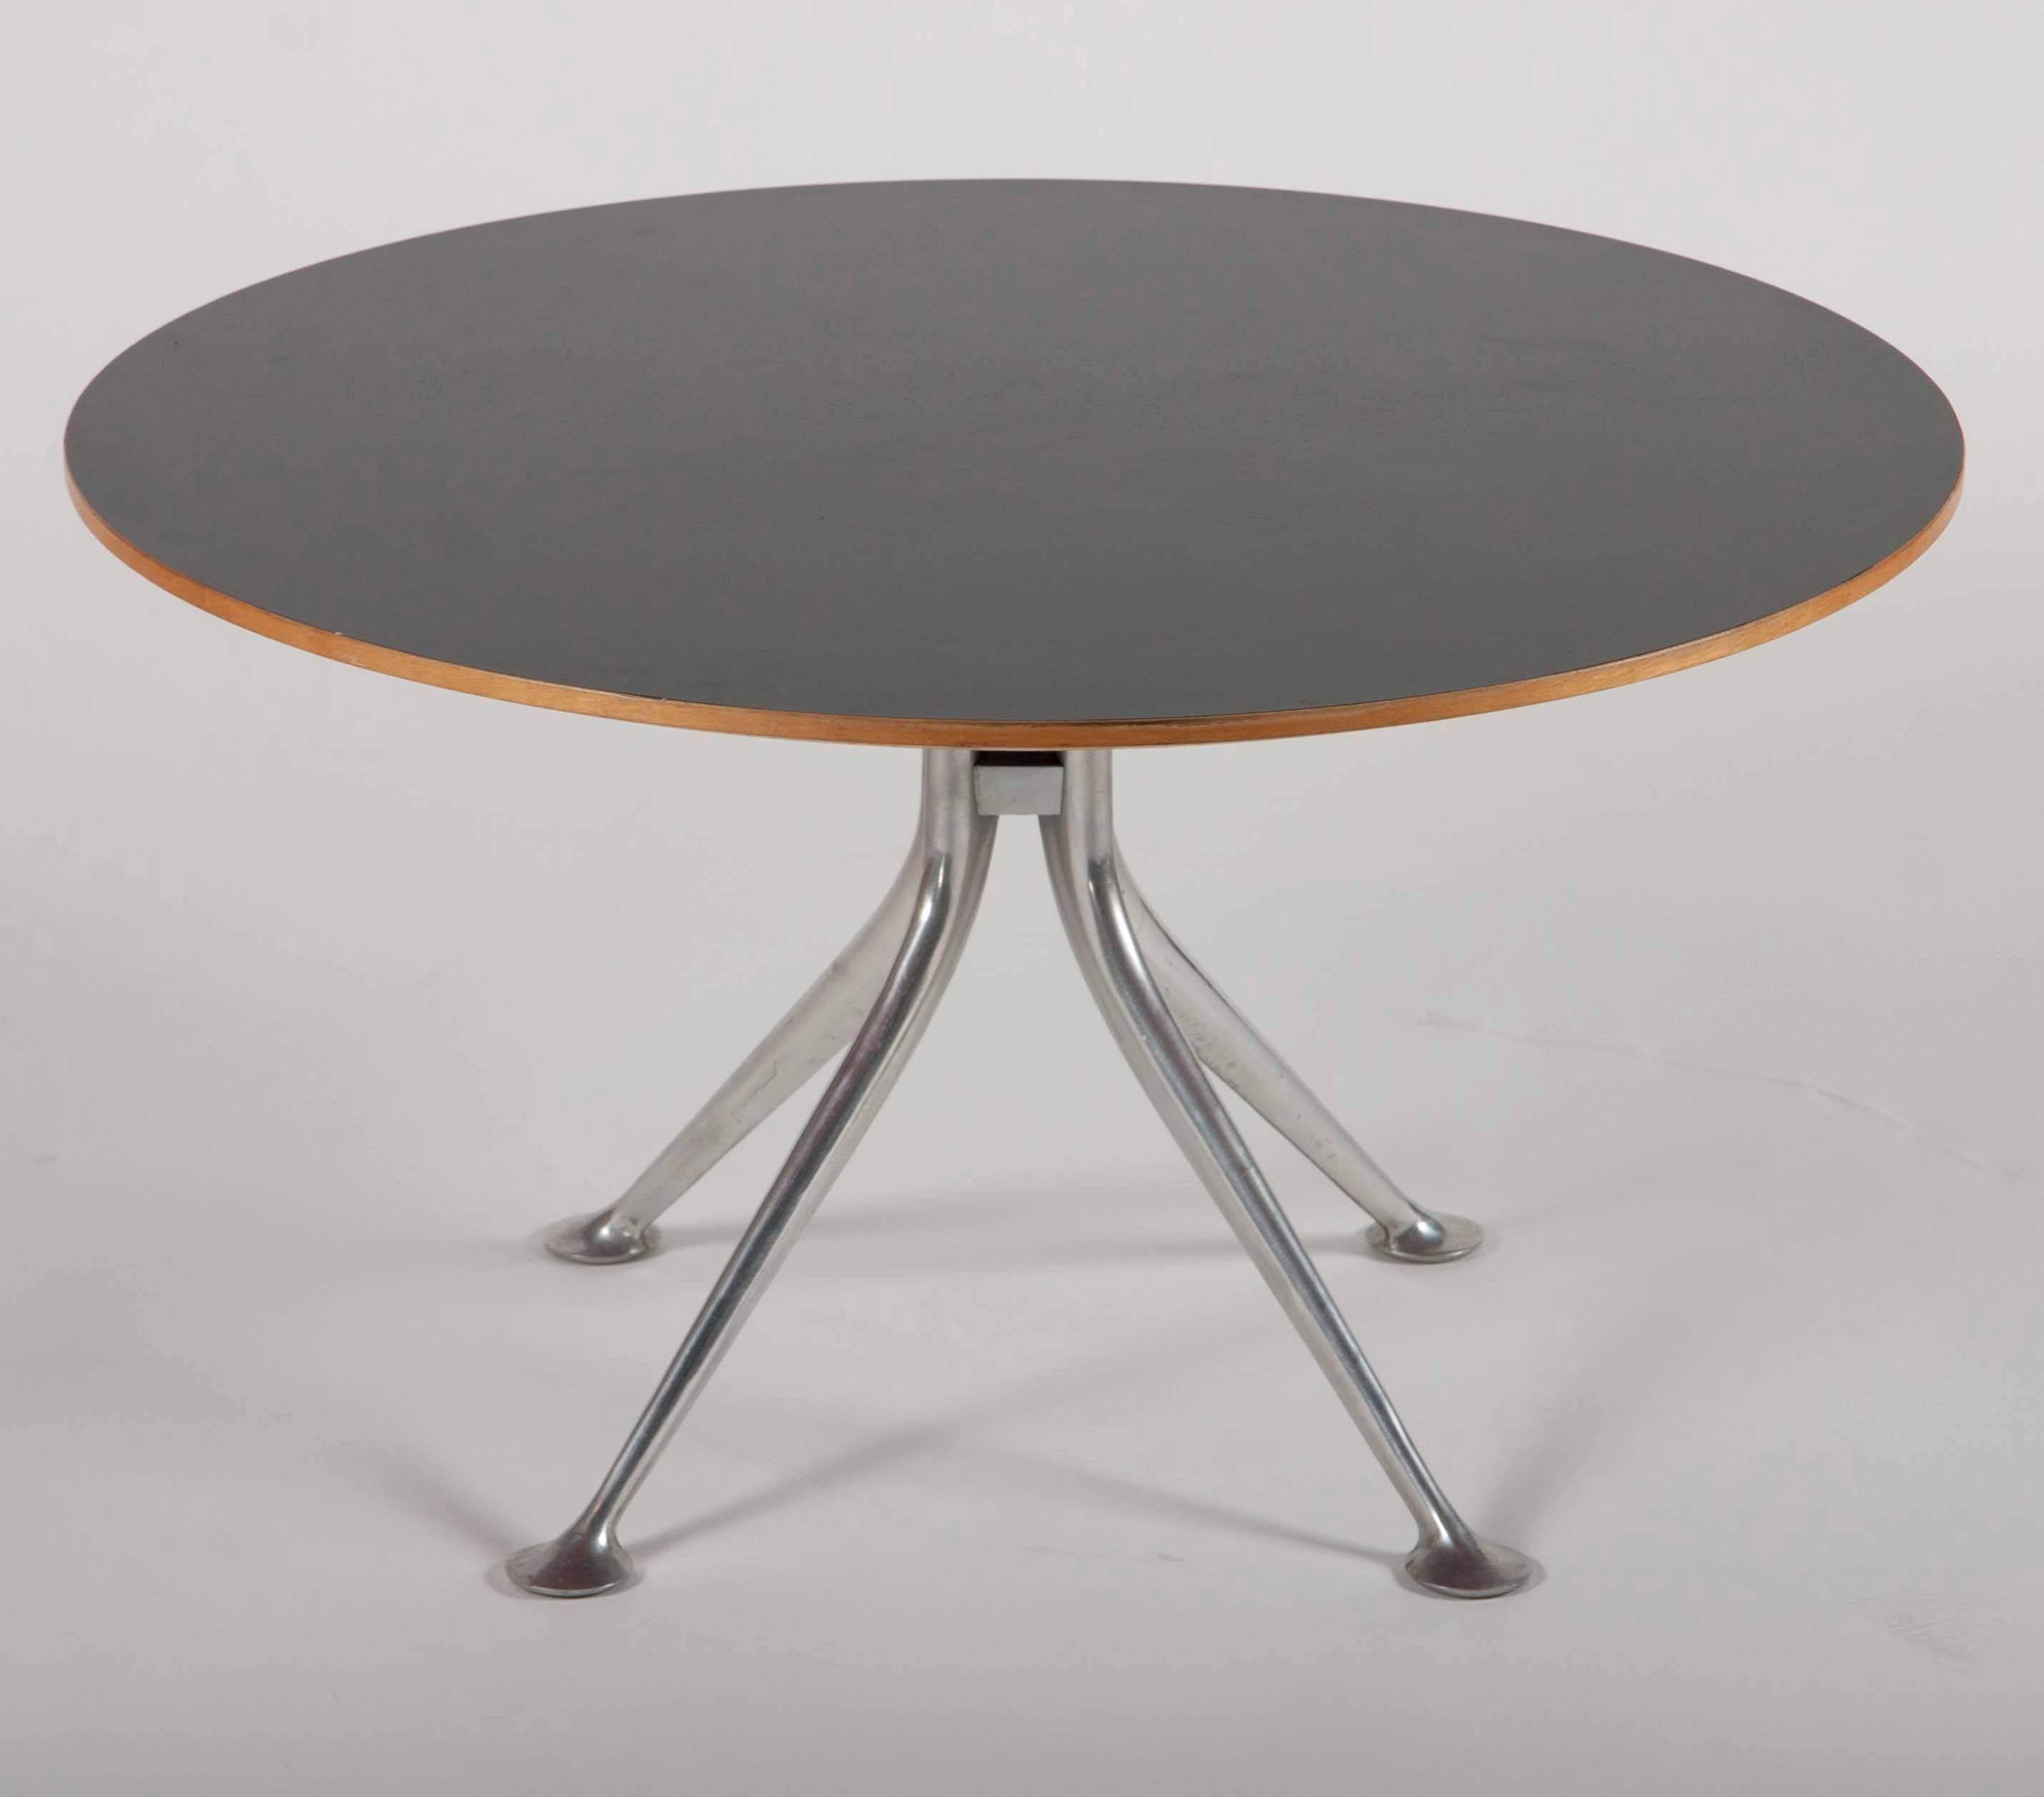 This rare form of Alexander Girard's round coffee table was only briefly made in the 1960s by Herman Miller.
  